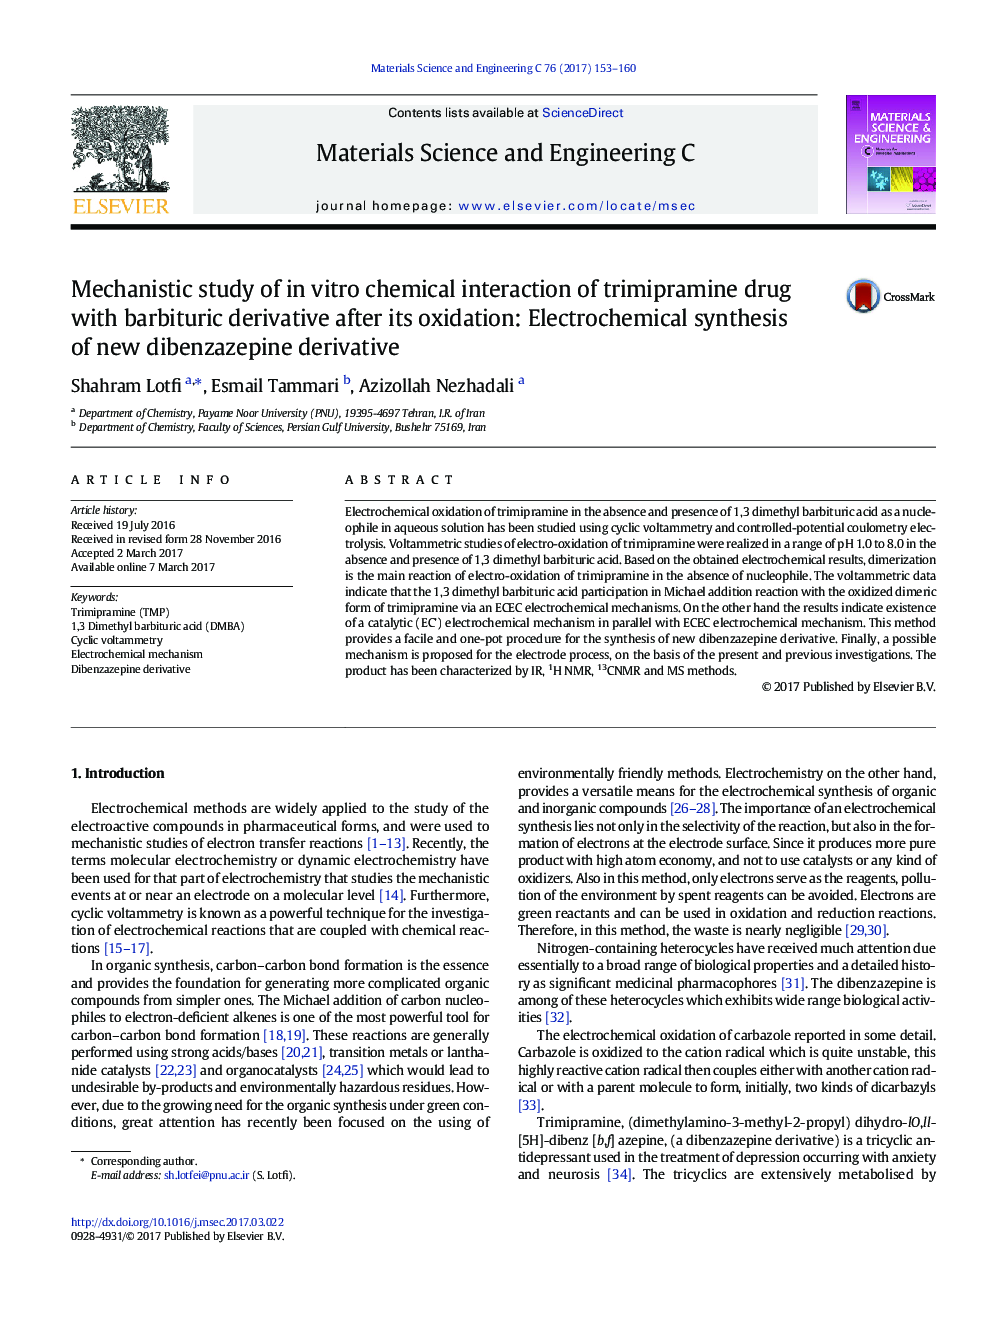 Mechanistic study of in vitro chemical interaction of trimipramine drug with barbituric derivative after its oxidation: Electrochemical synthesis of new dibenzazepine derivative